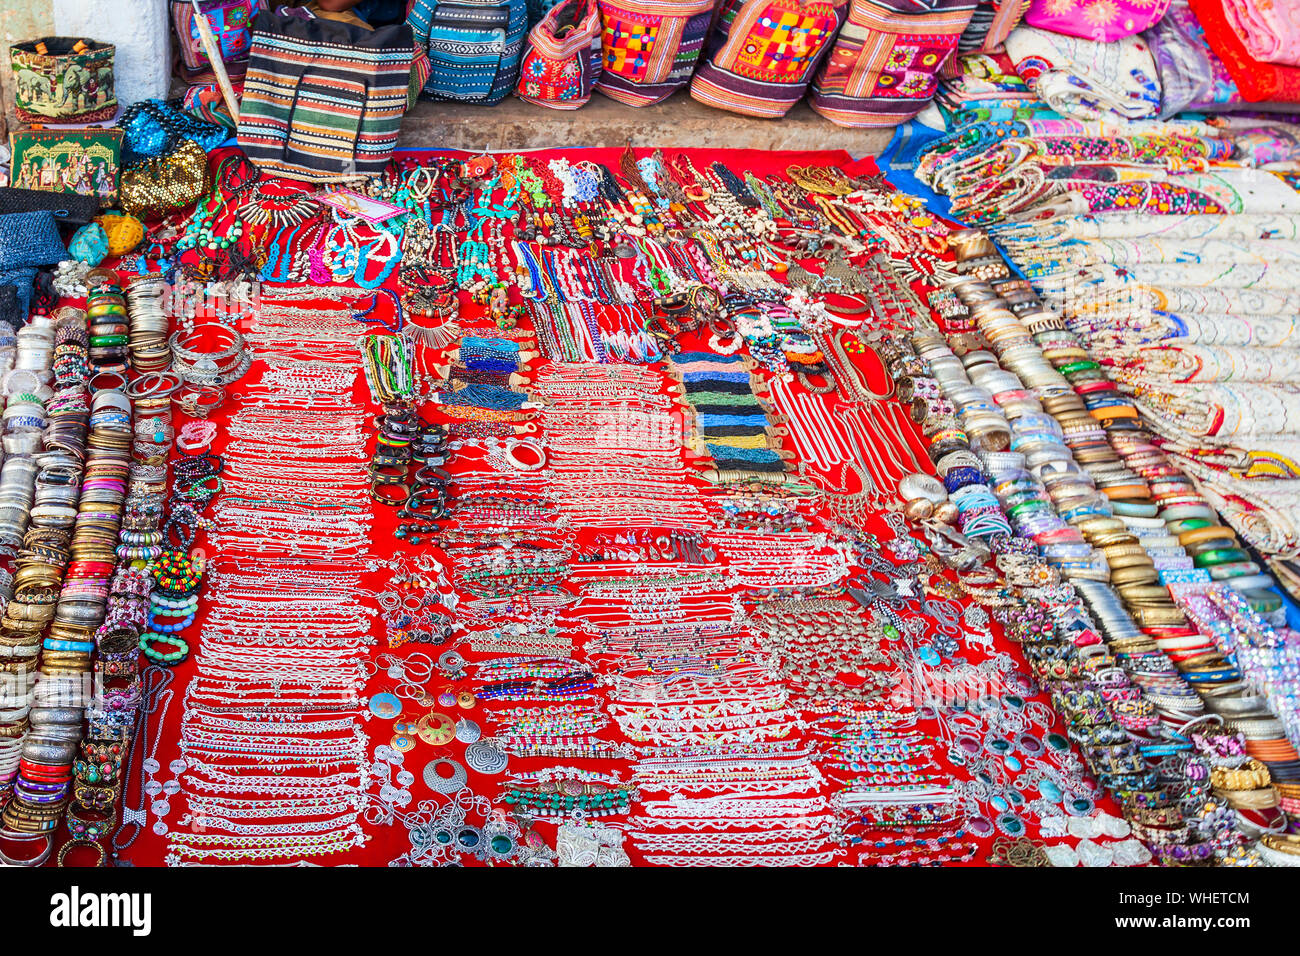 Indian jewellery and fabric at the local market in India Stock Photo